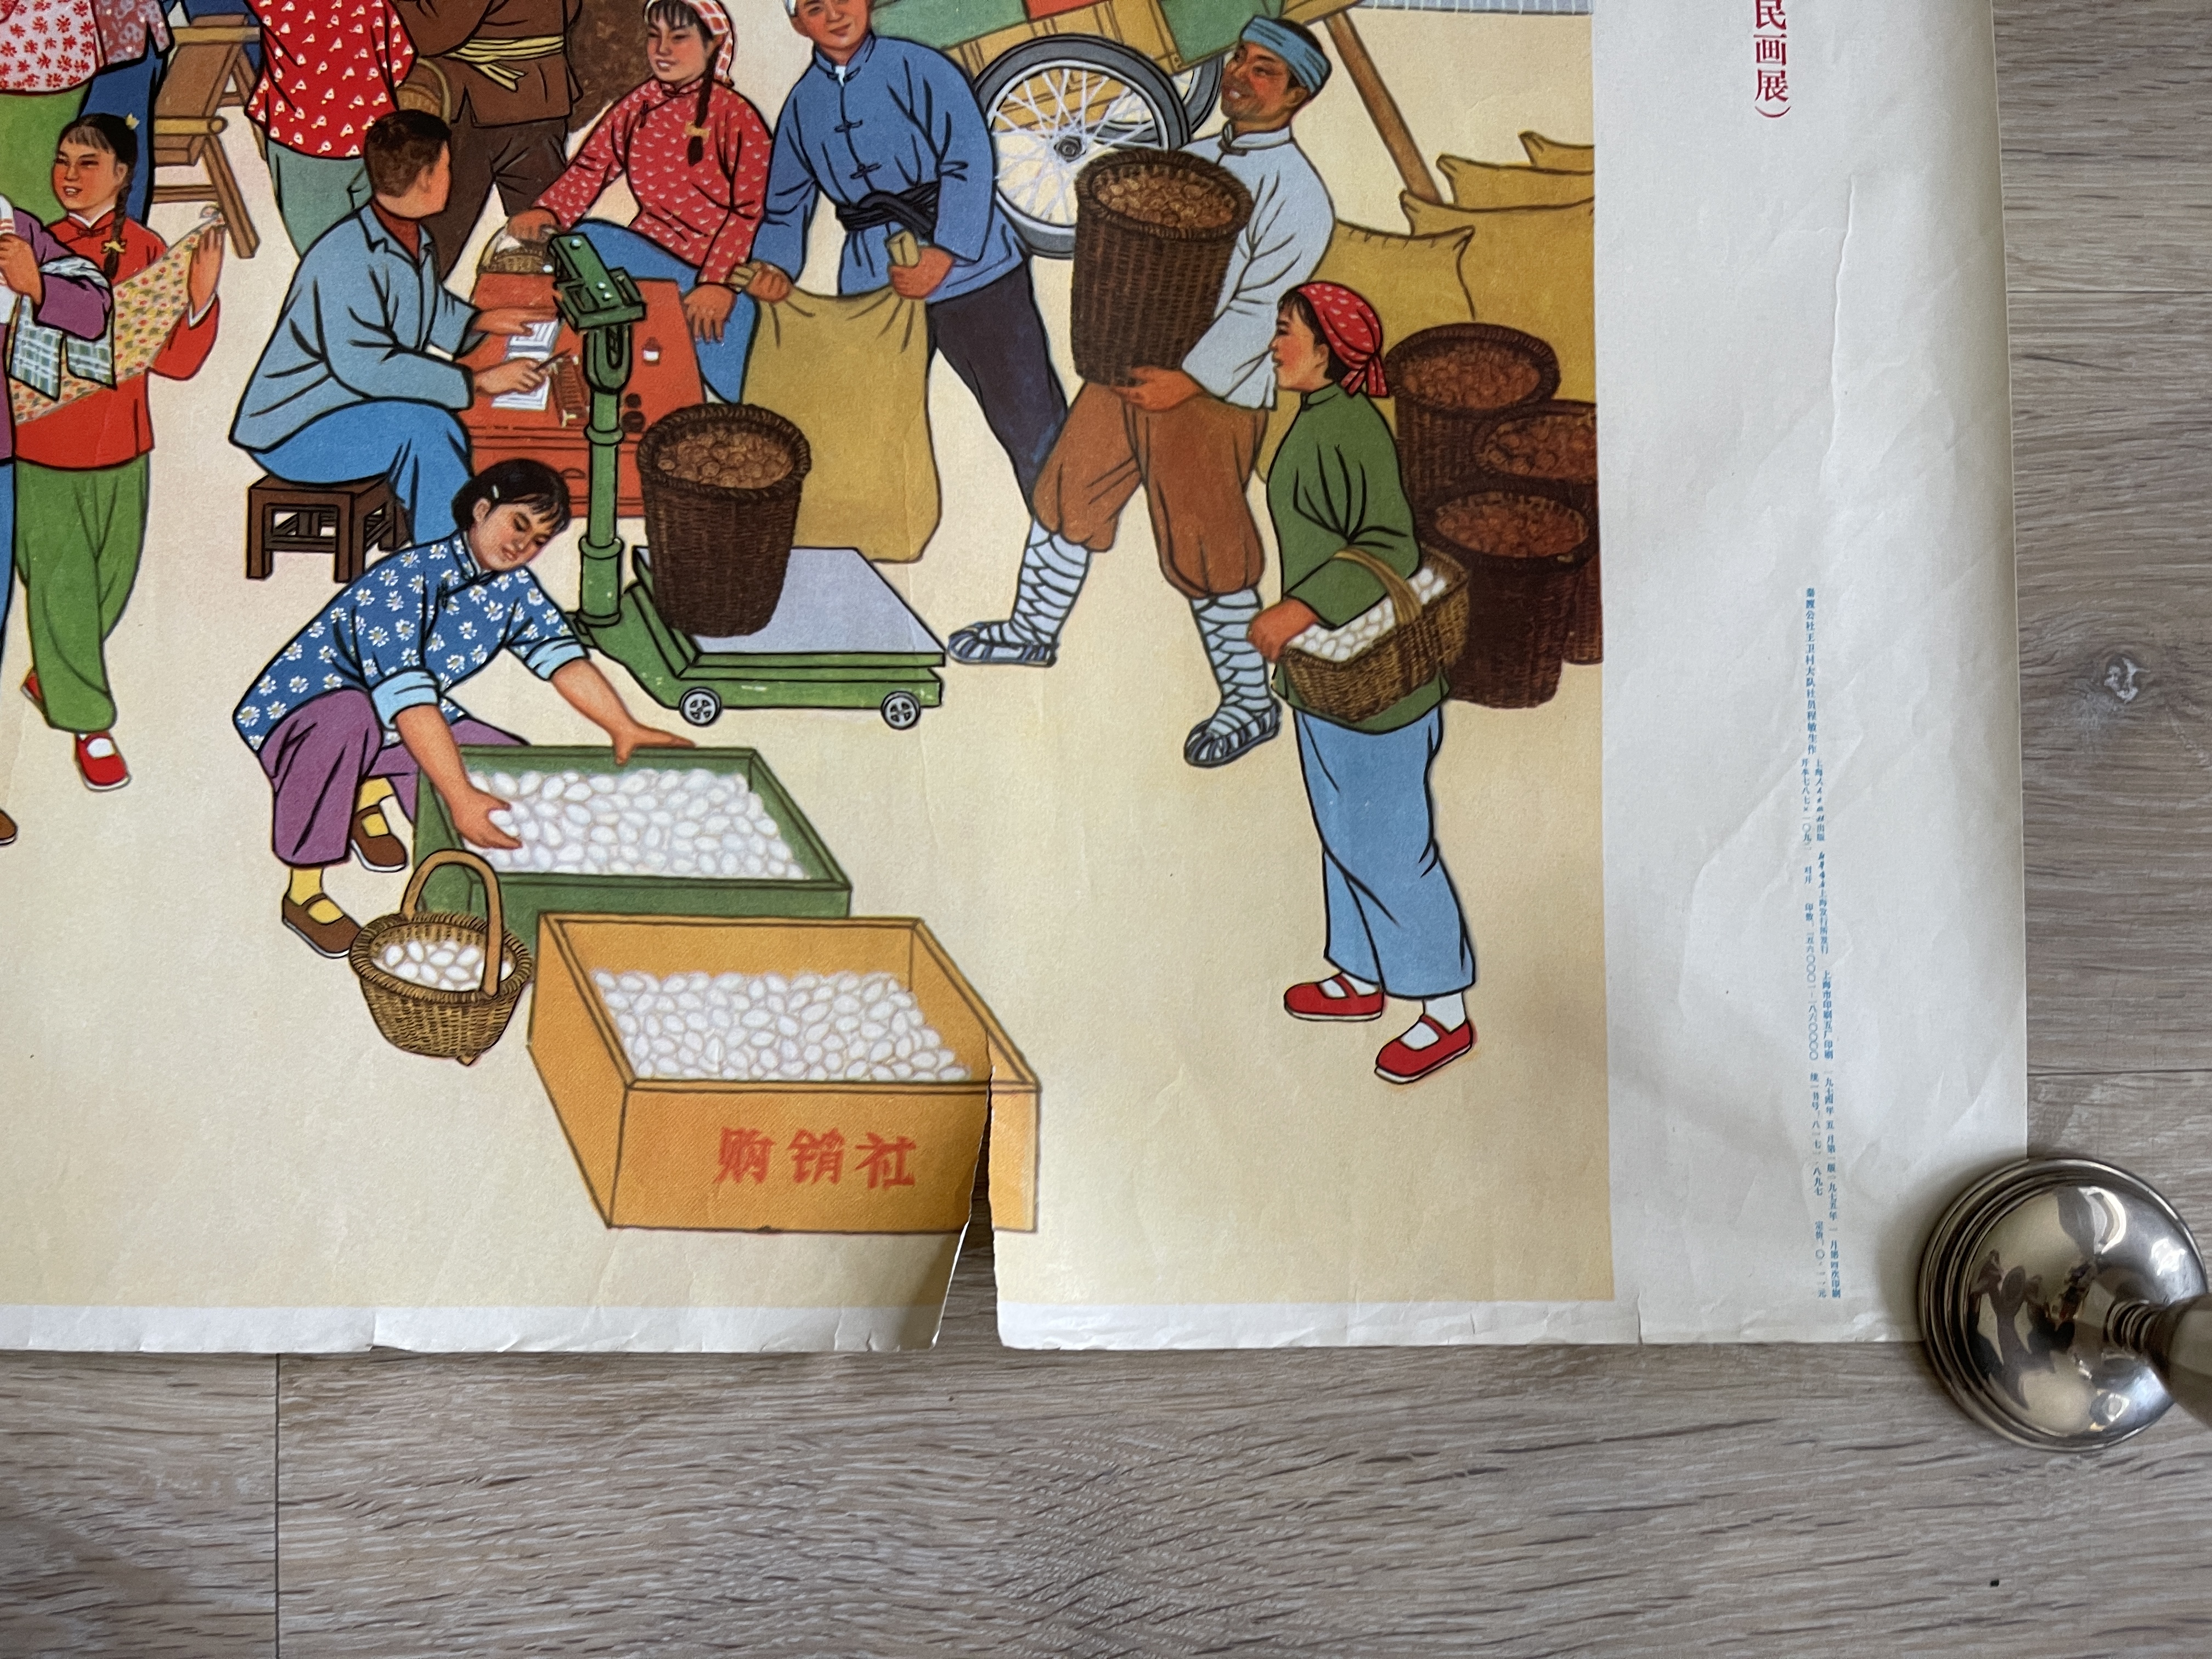 New Market Style - Original Vintage Chinese Poster - Image 5 of 7